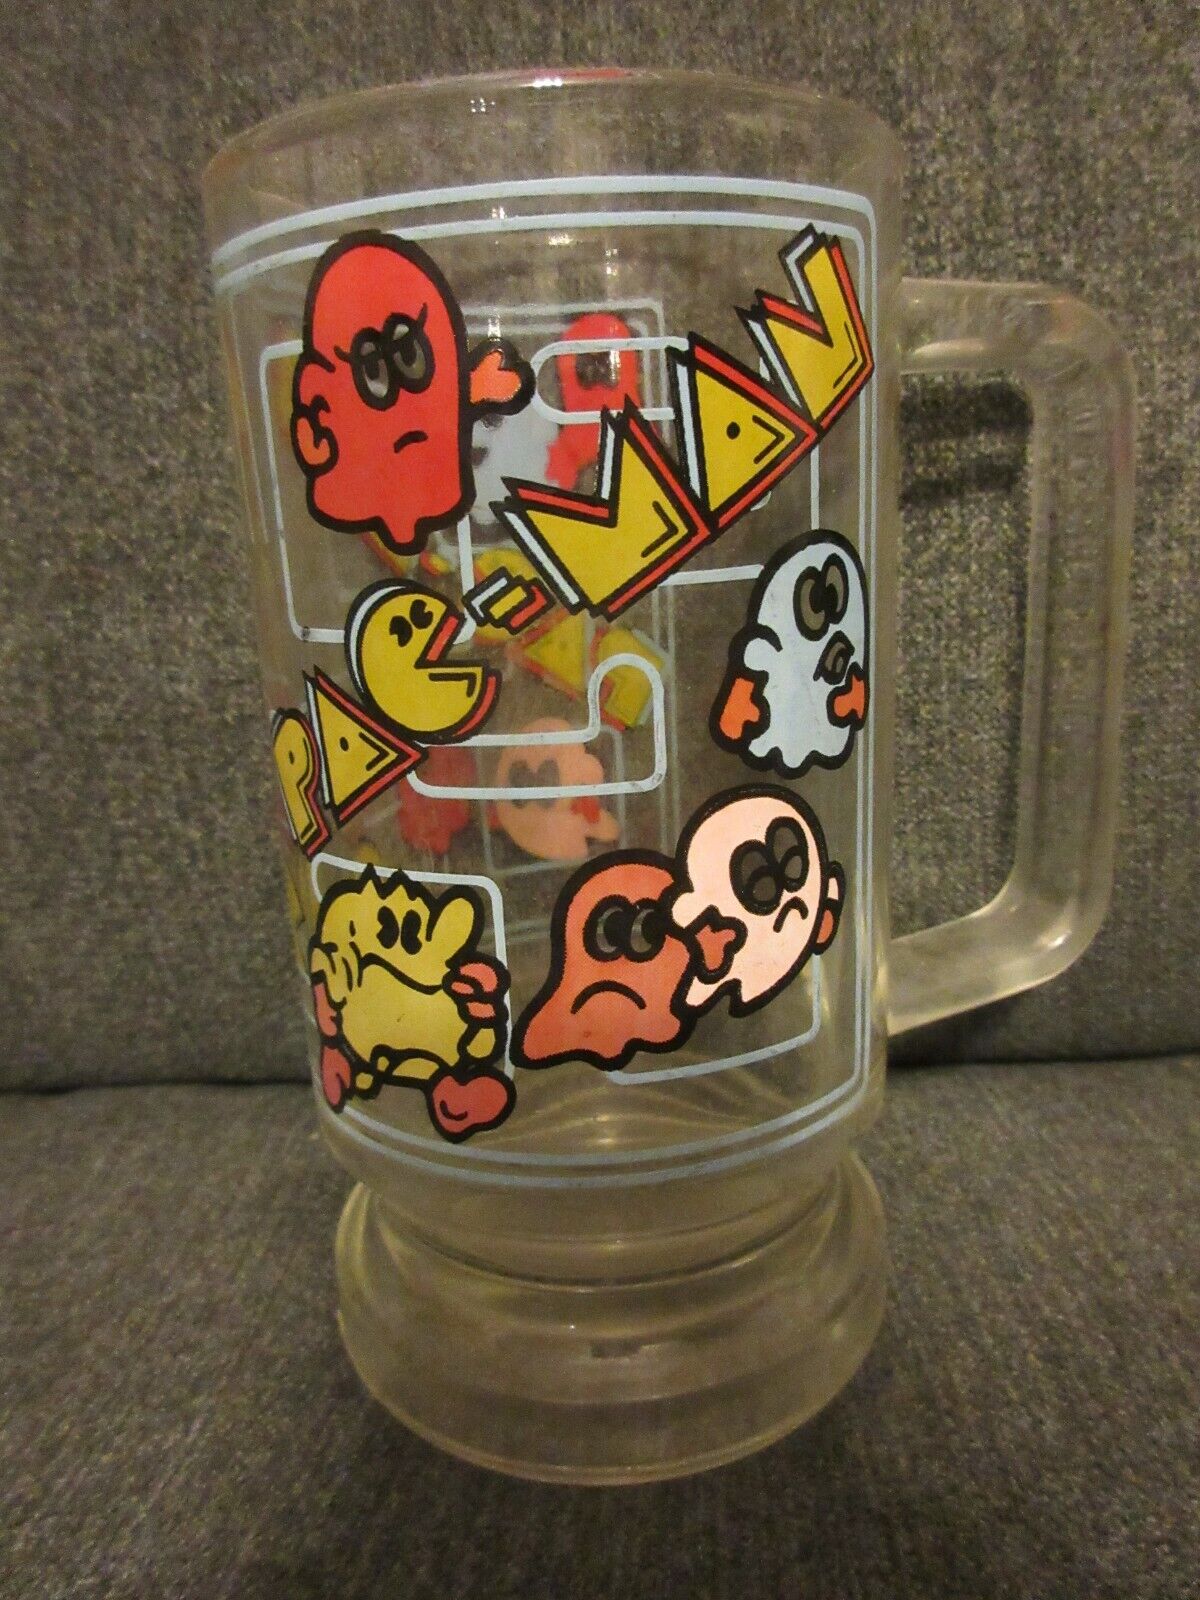 Vintage Pac-Man Glass Mug by Midway Mfg. Co.